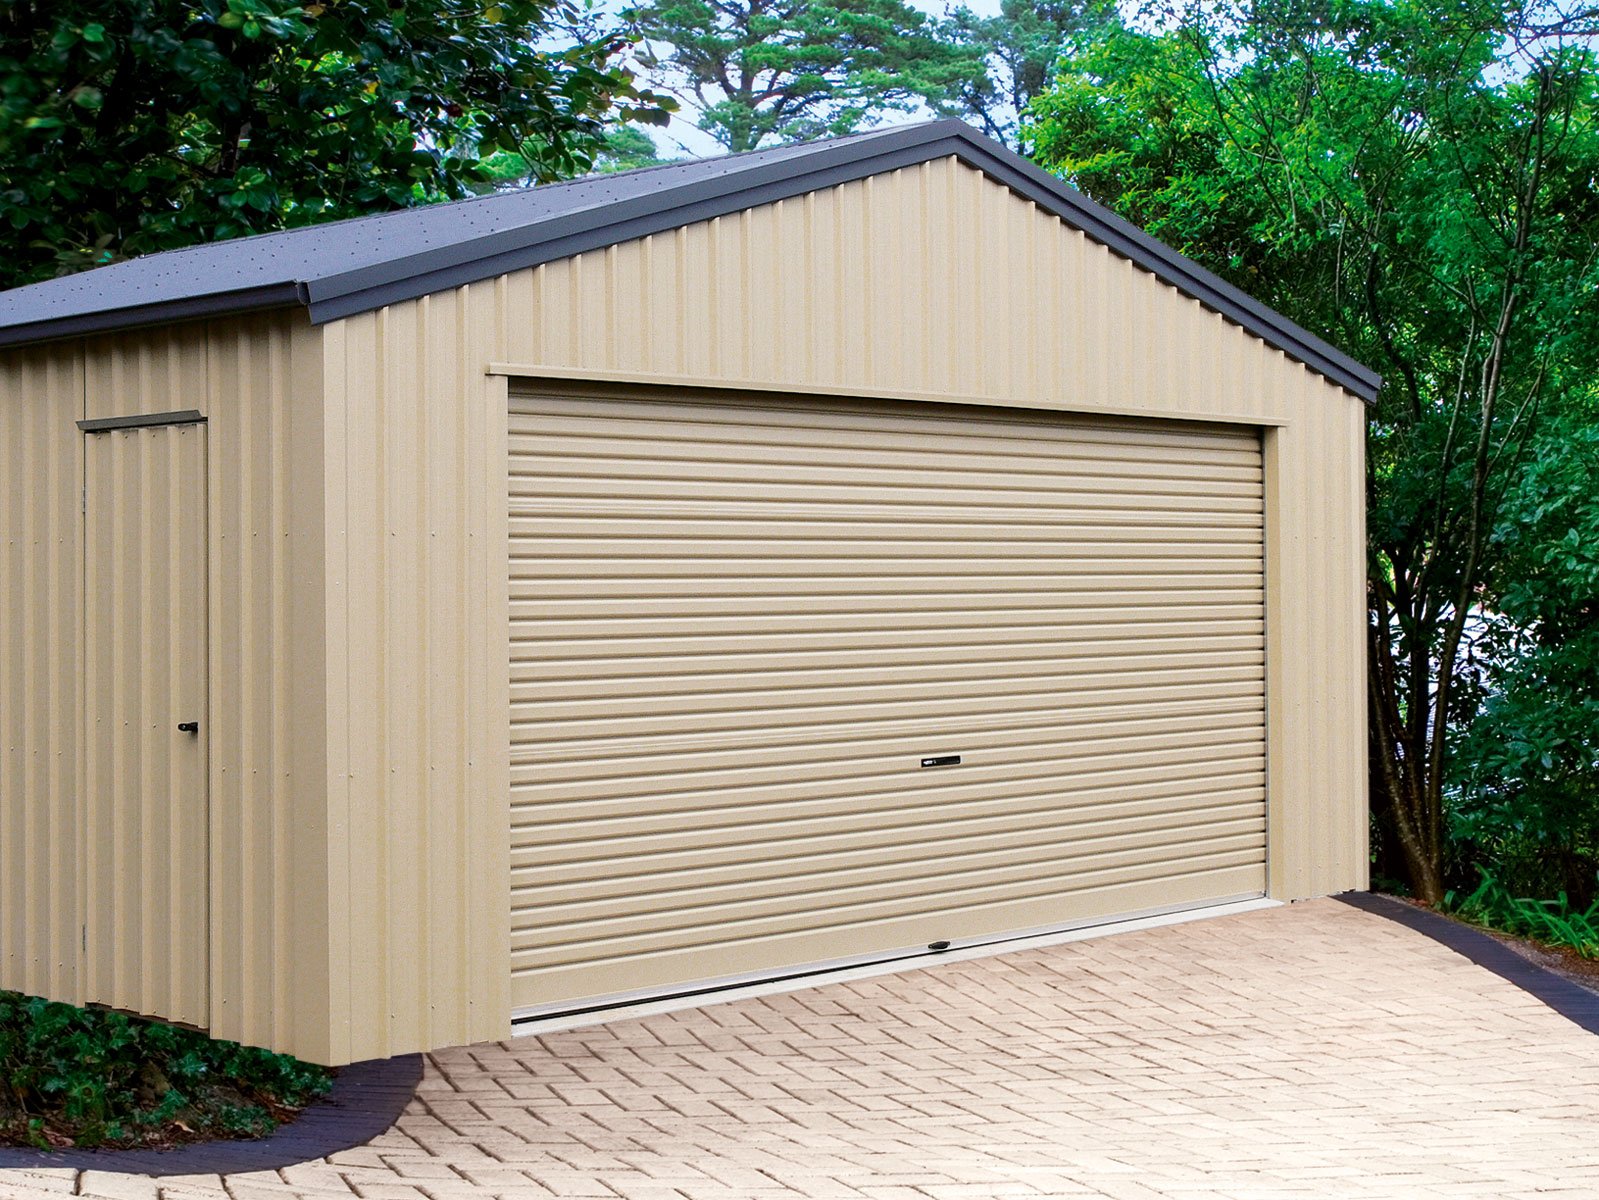 Gable Roof Shed Stratco